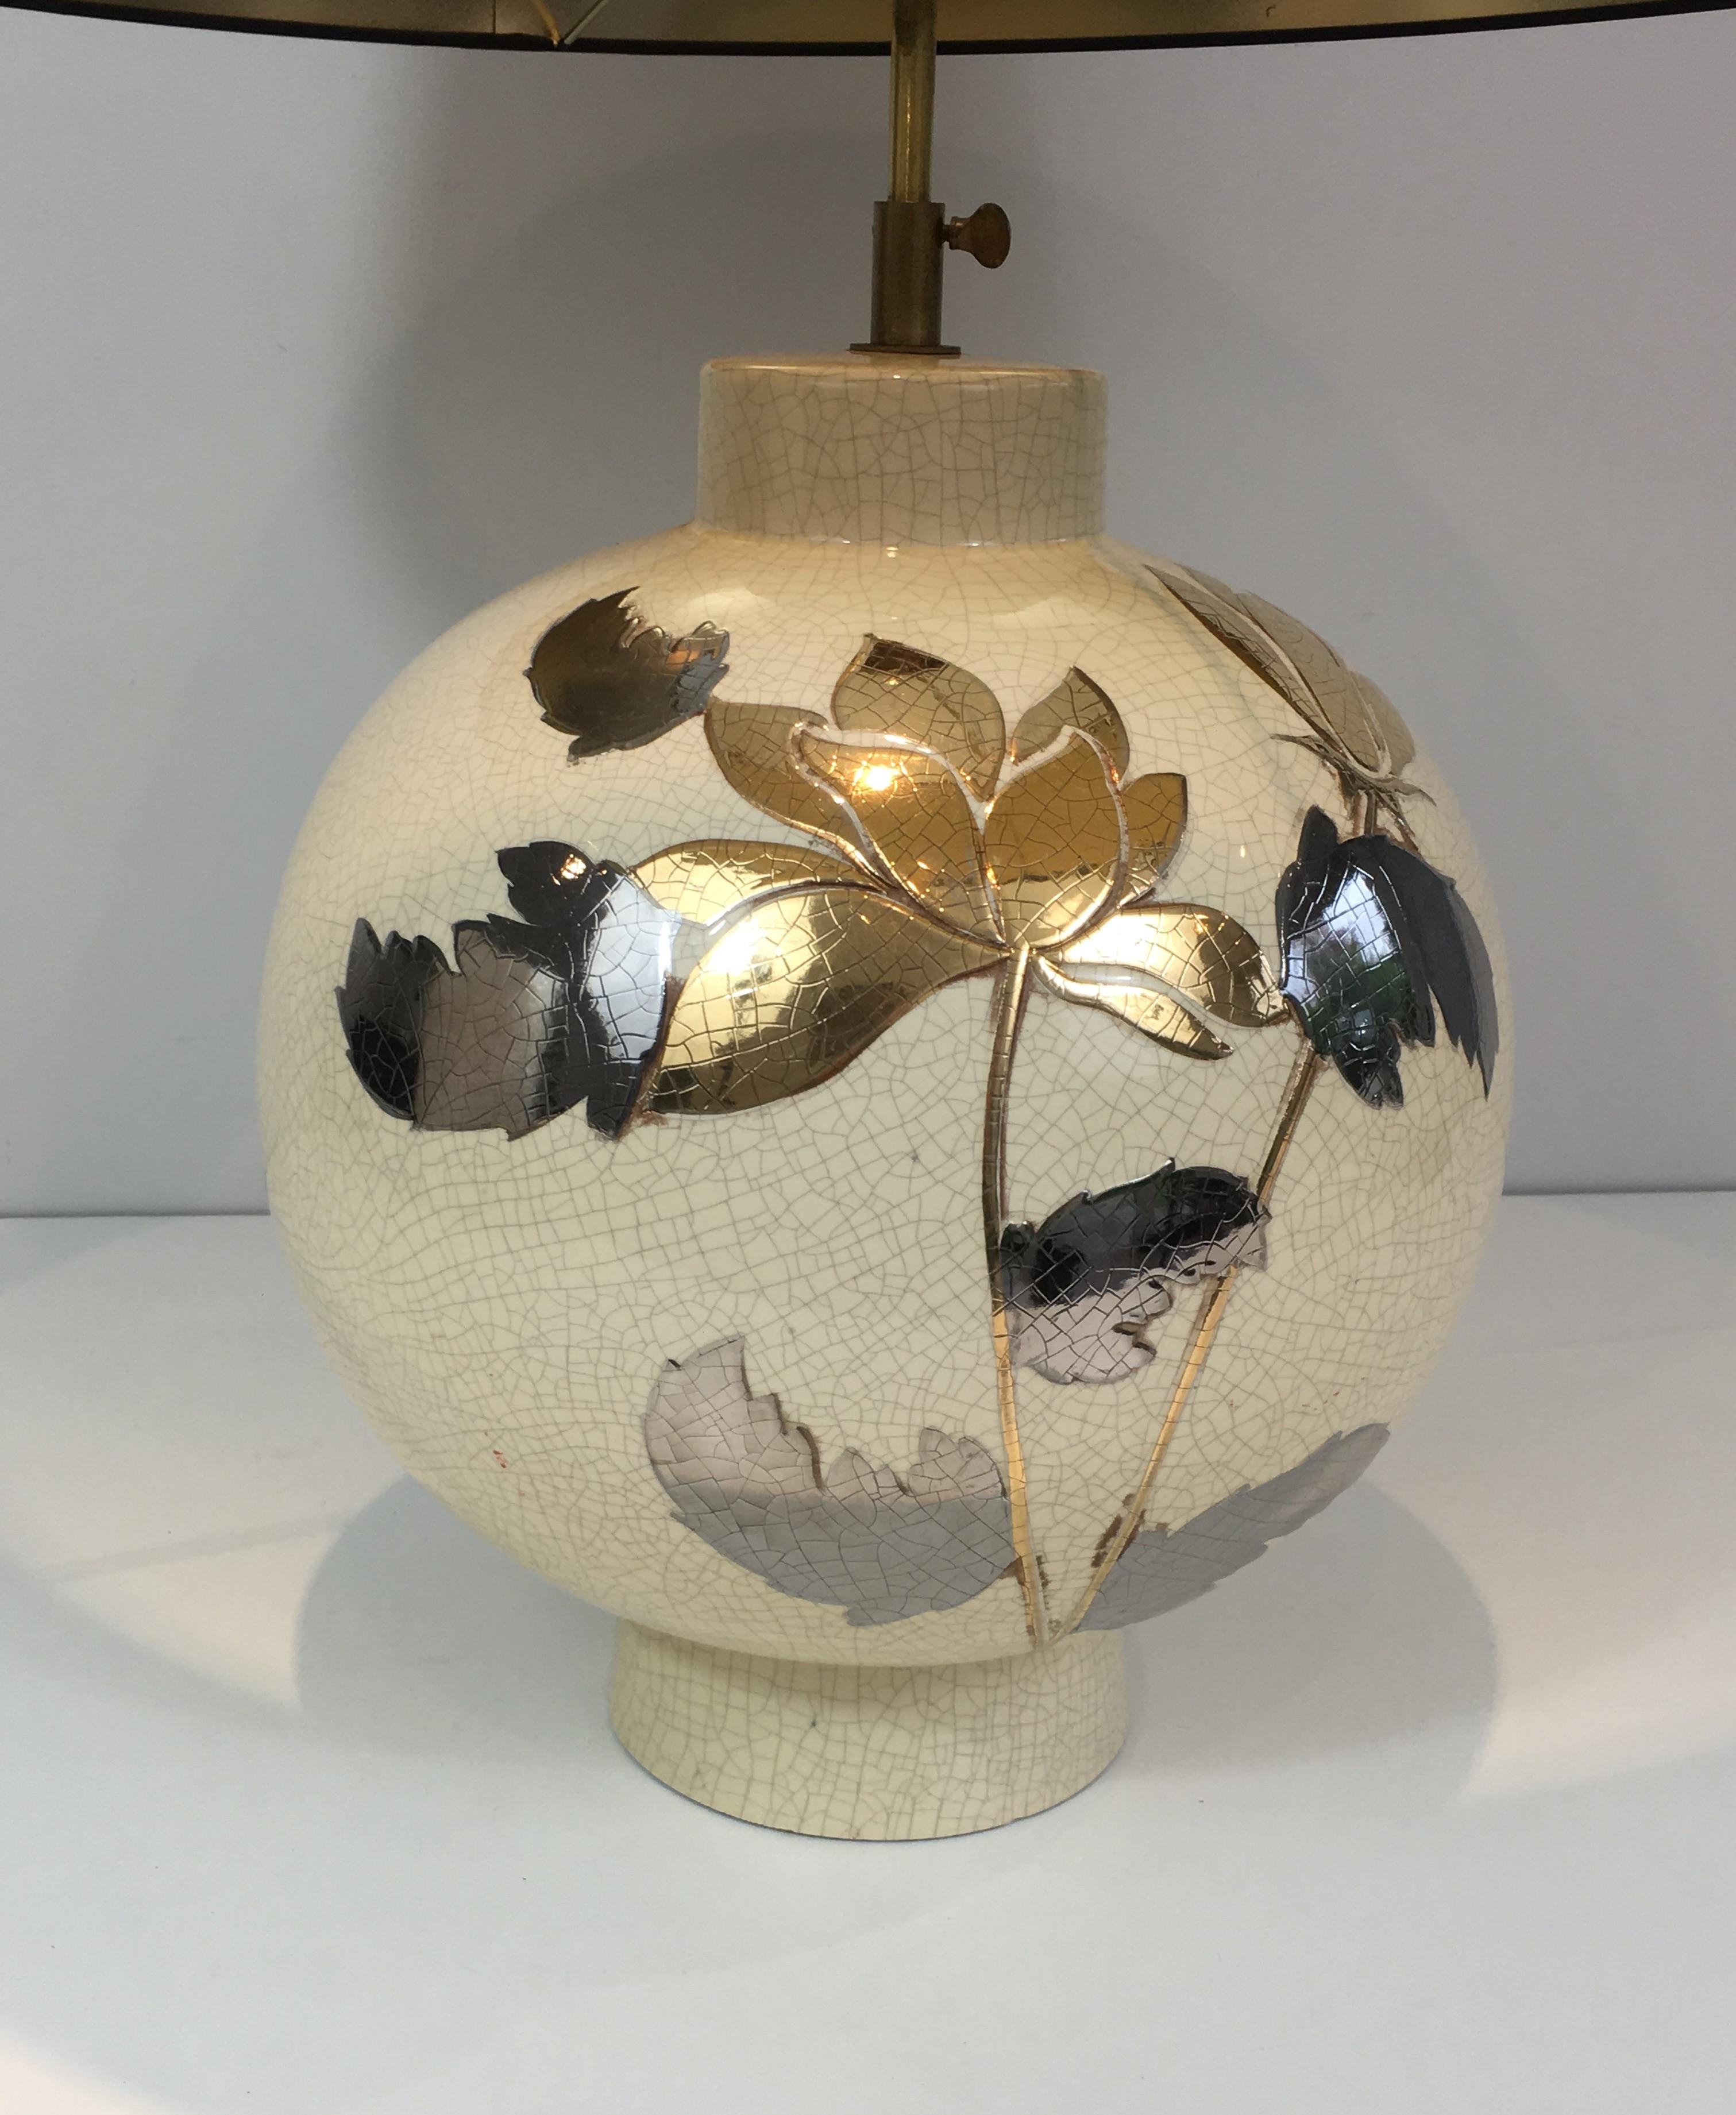 Mid-Century Modern By L Drummer, Cracked Ceramic Lamp with Silver and Gold Flower Decoration on the